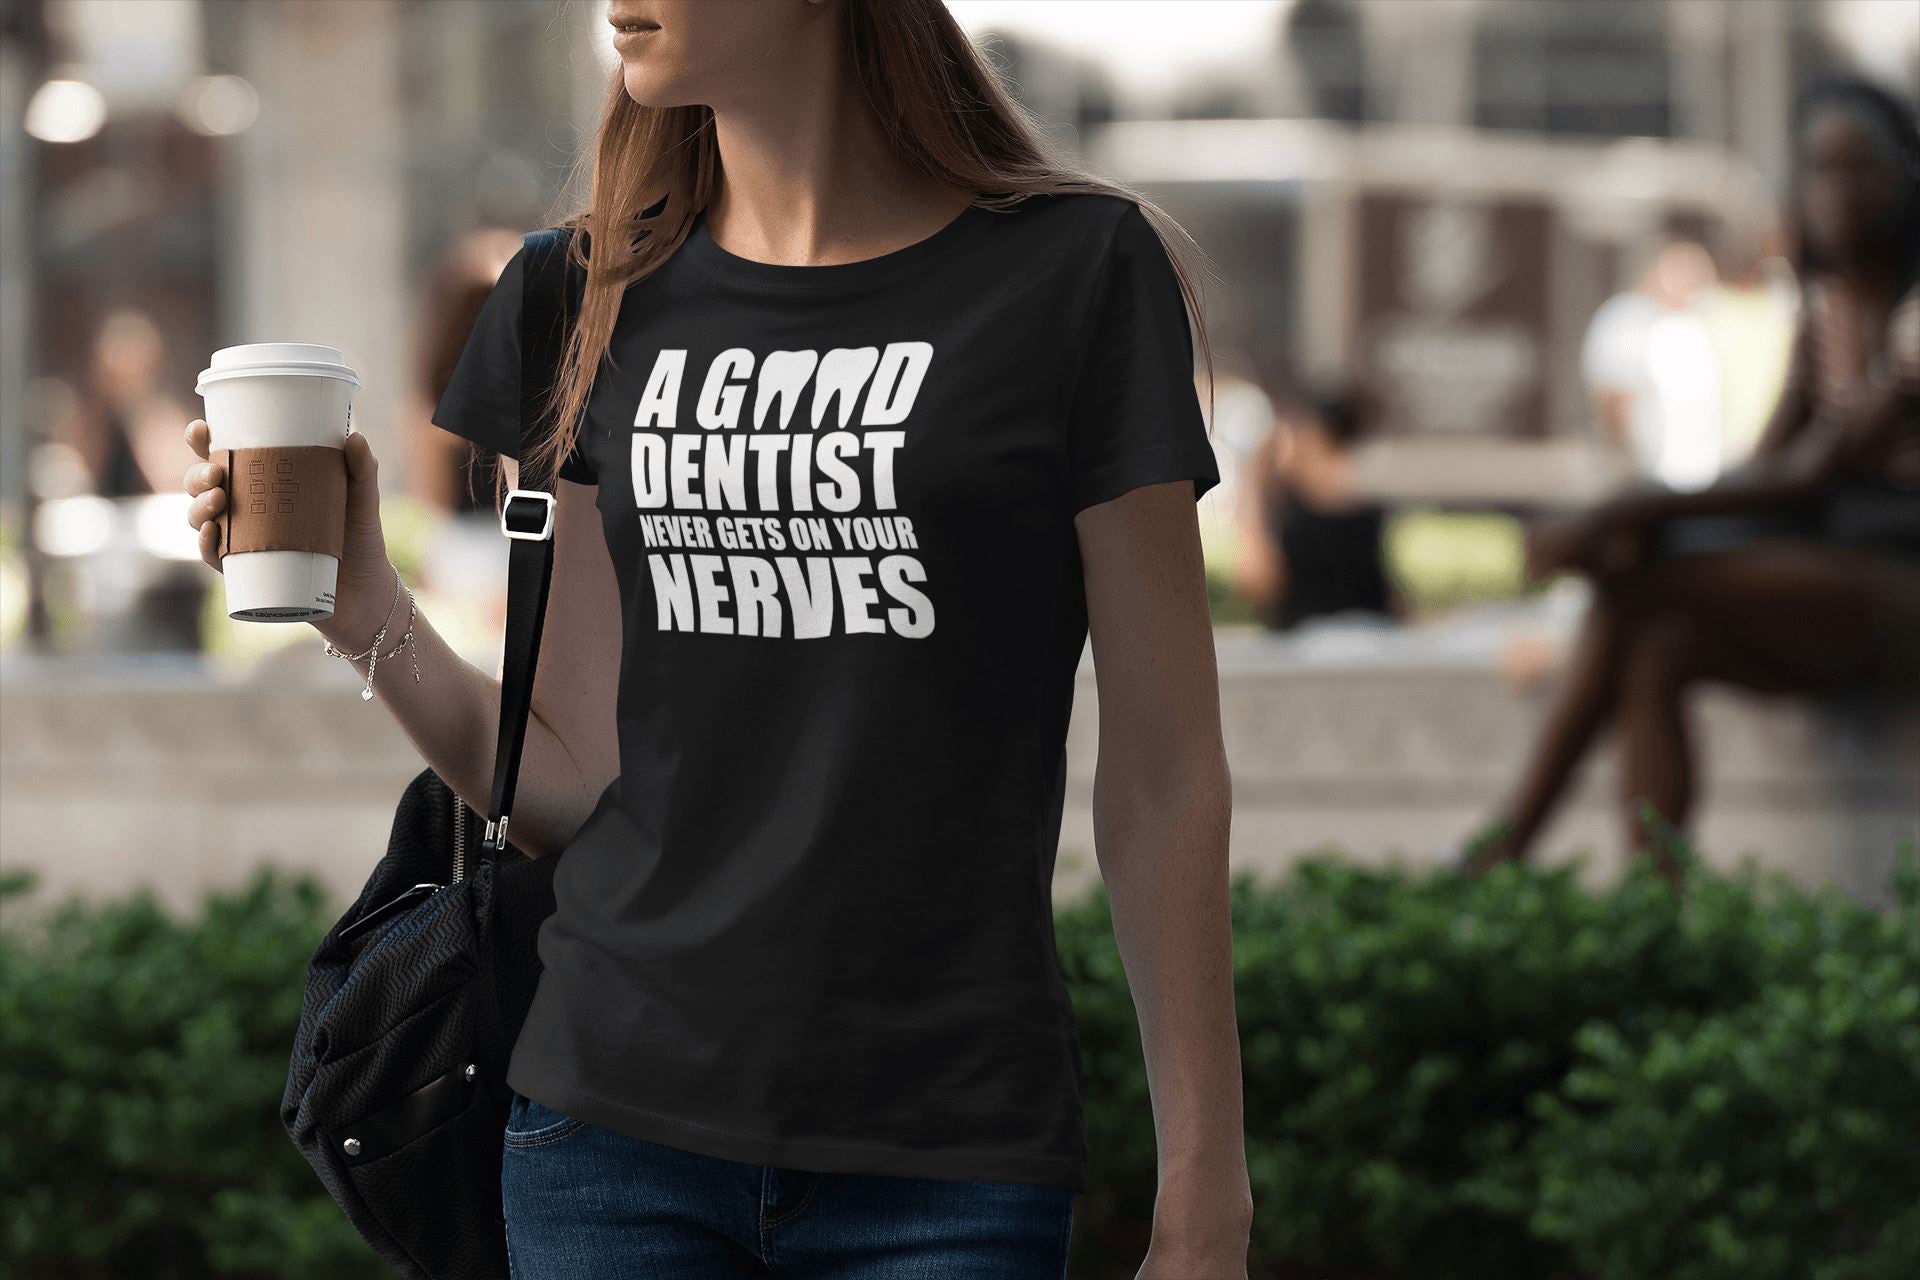 A Good Dentist Never gets on your Nerves Funny T Shirt for Dentists | Premium Design | Catch My Drift India - Catch My Drift India  black, clothing, dentist, made in india, shirt, t shirt, ts